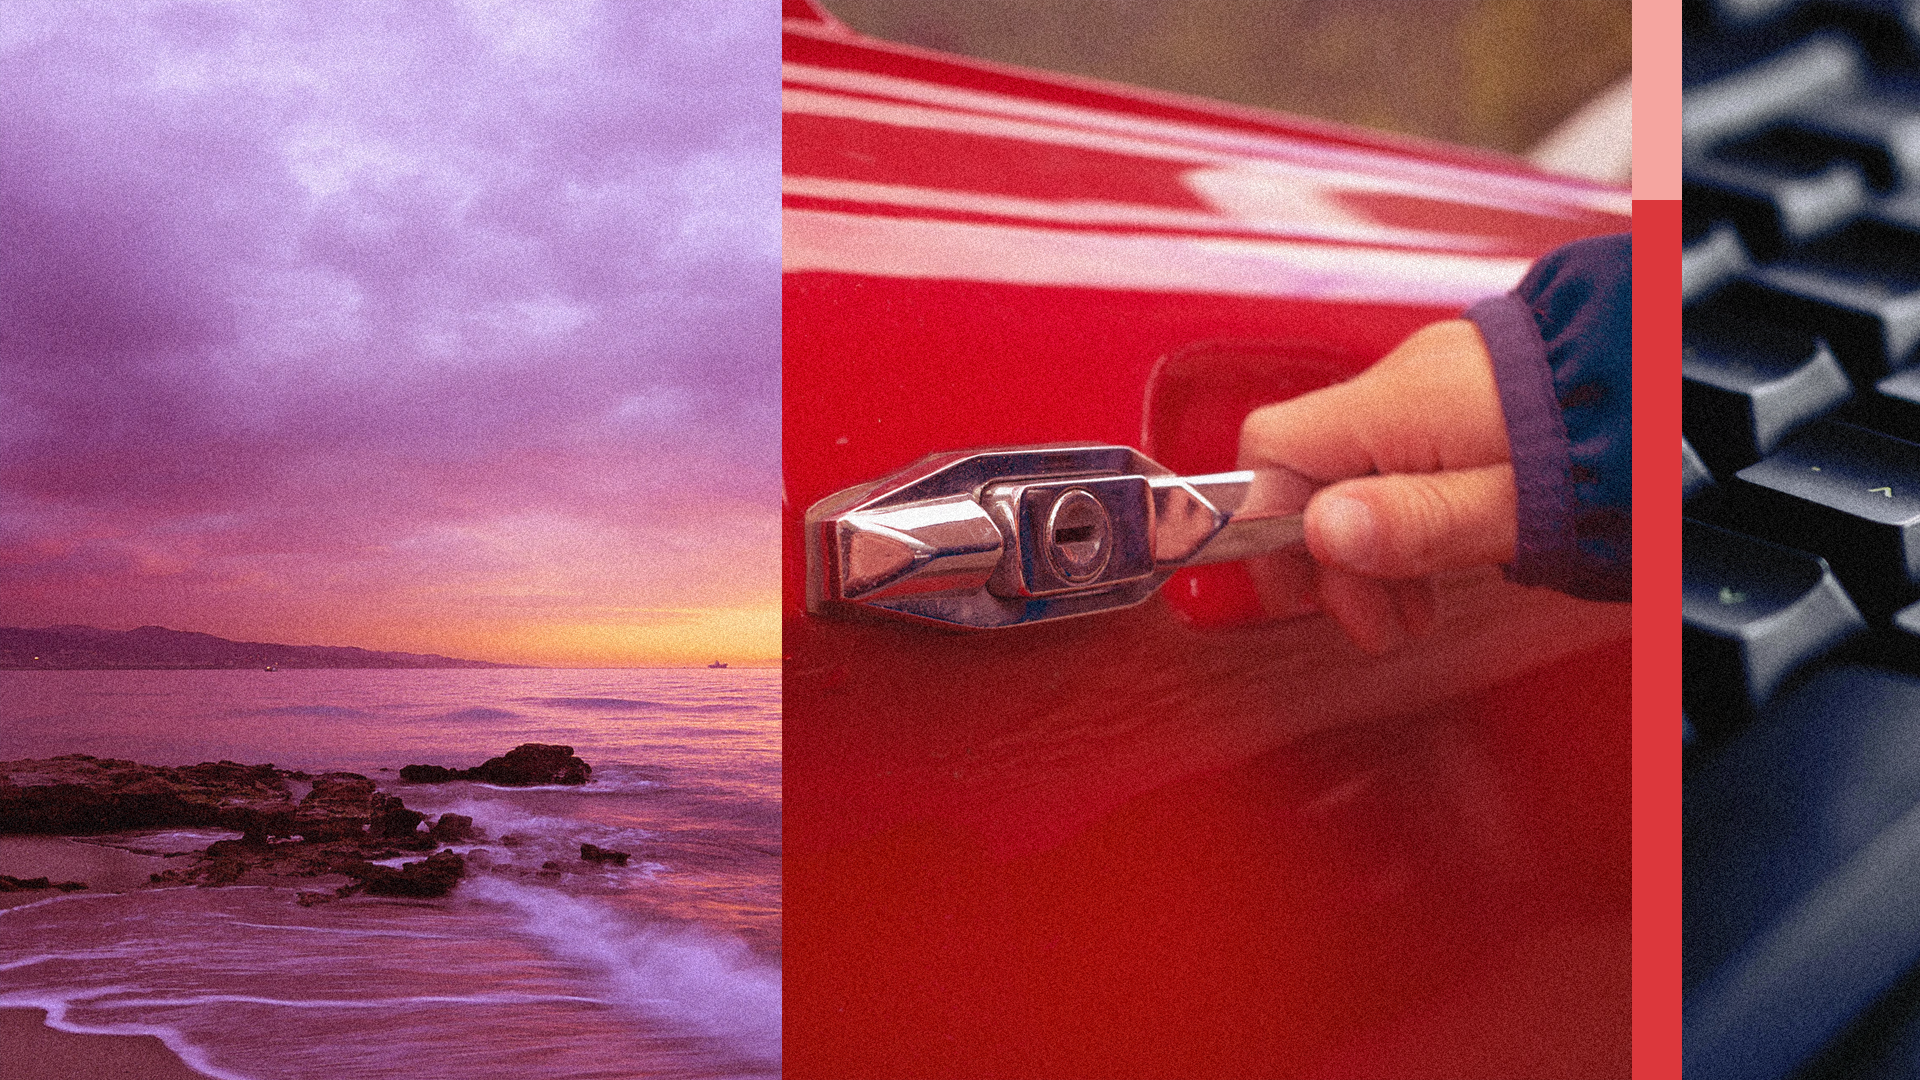 Left: waves crash into rocks on a shore. Center: A hand engages with a. car door handle. Right: keys of a computer keyboard.